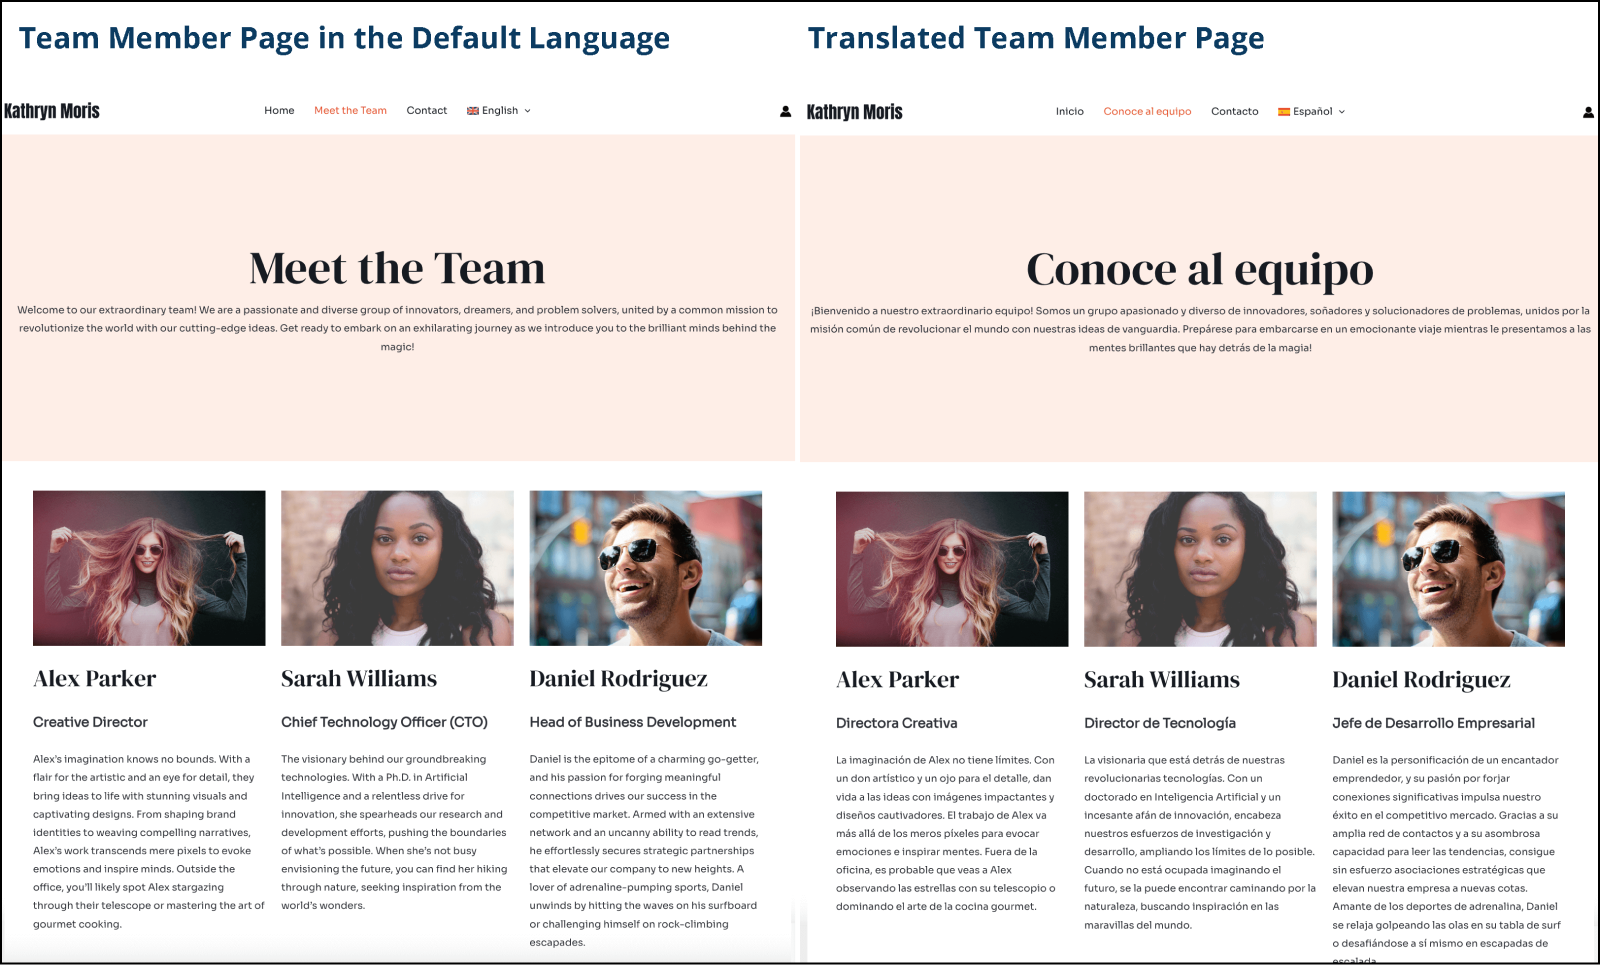 Two views of the "Meet the Team" page after translation. The English version is shown on the left, with the Spanish version on the right. 